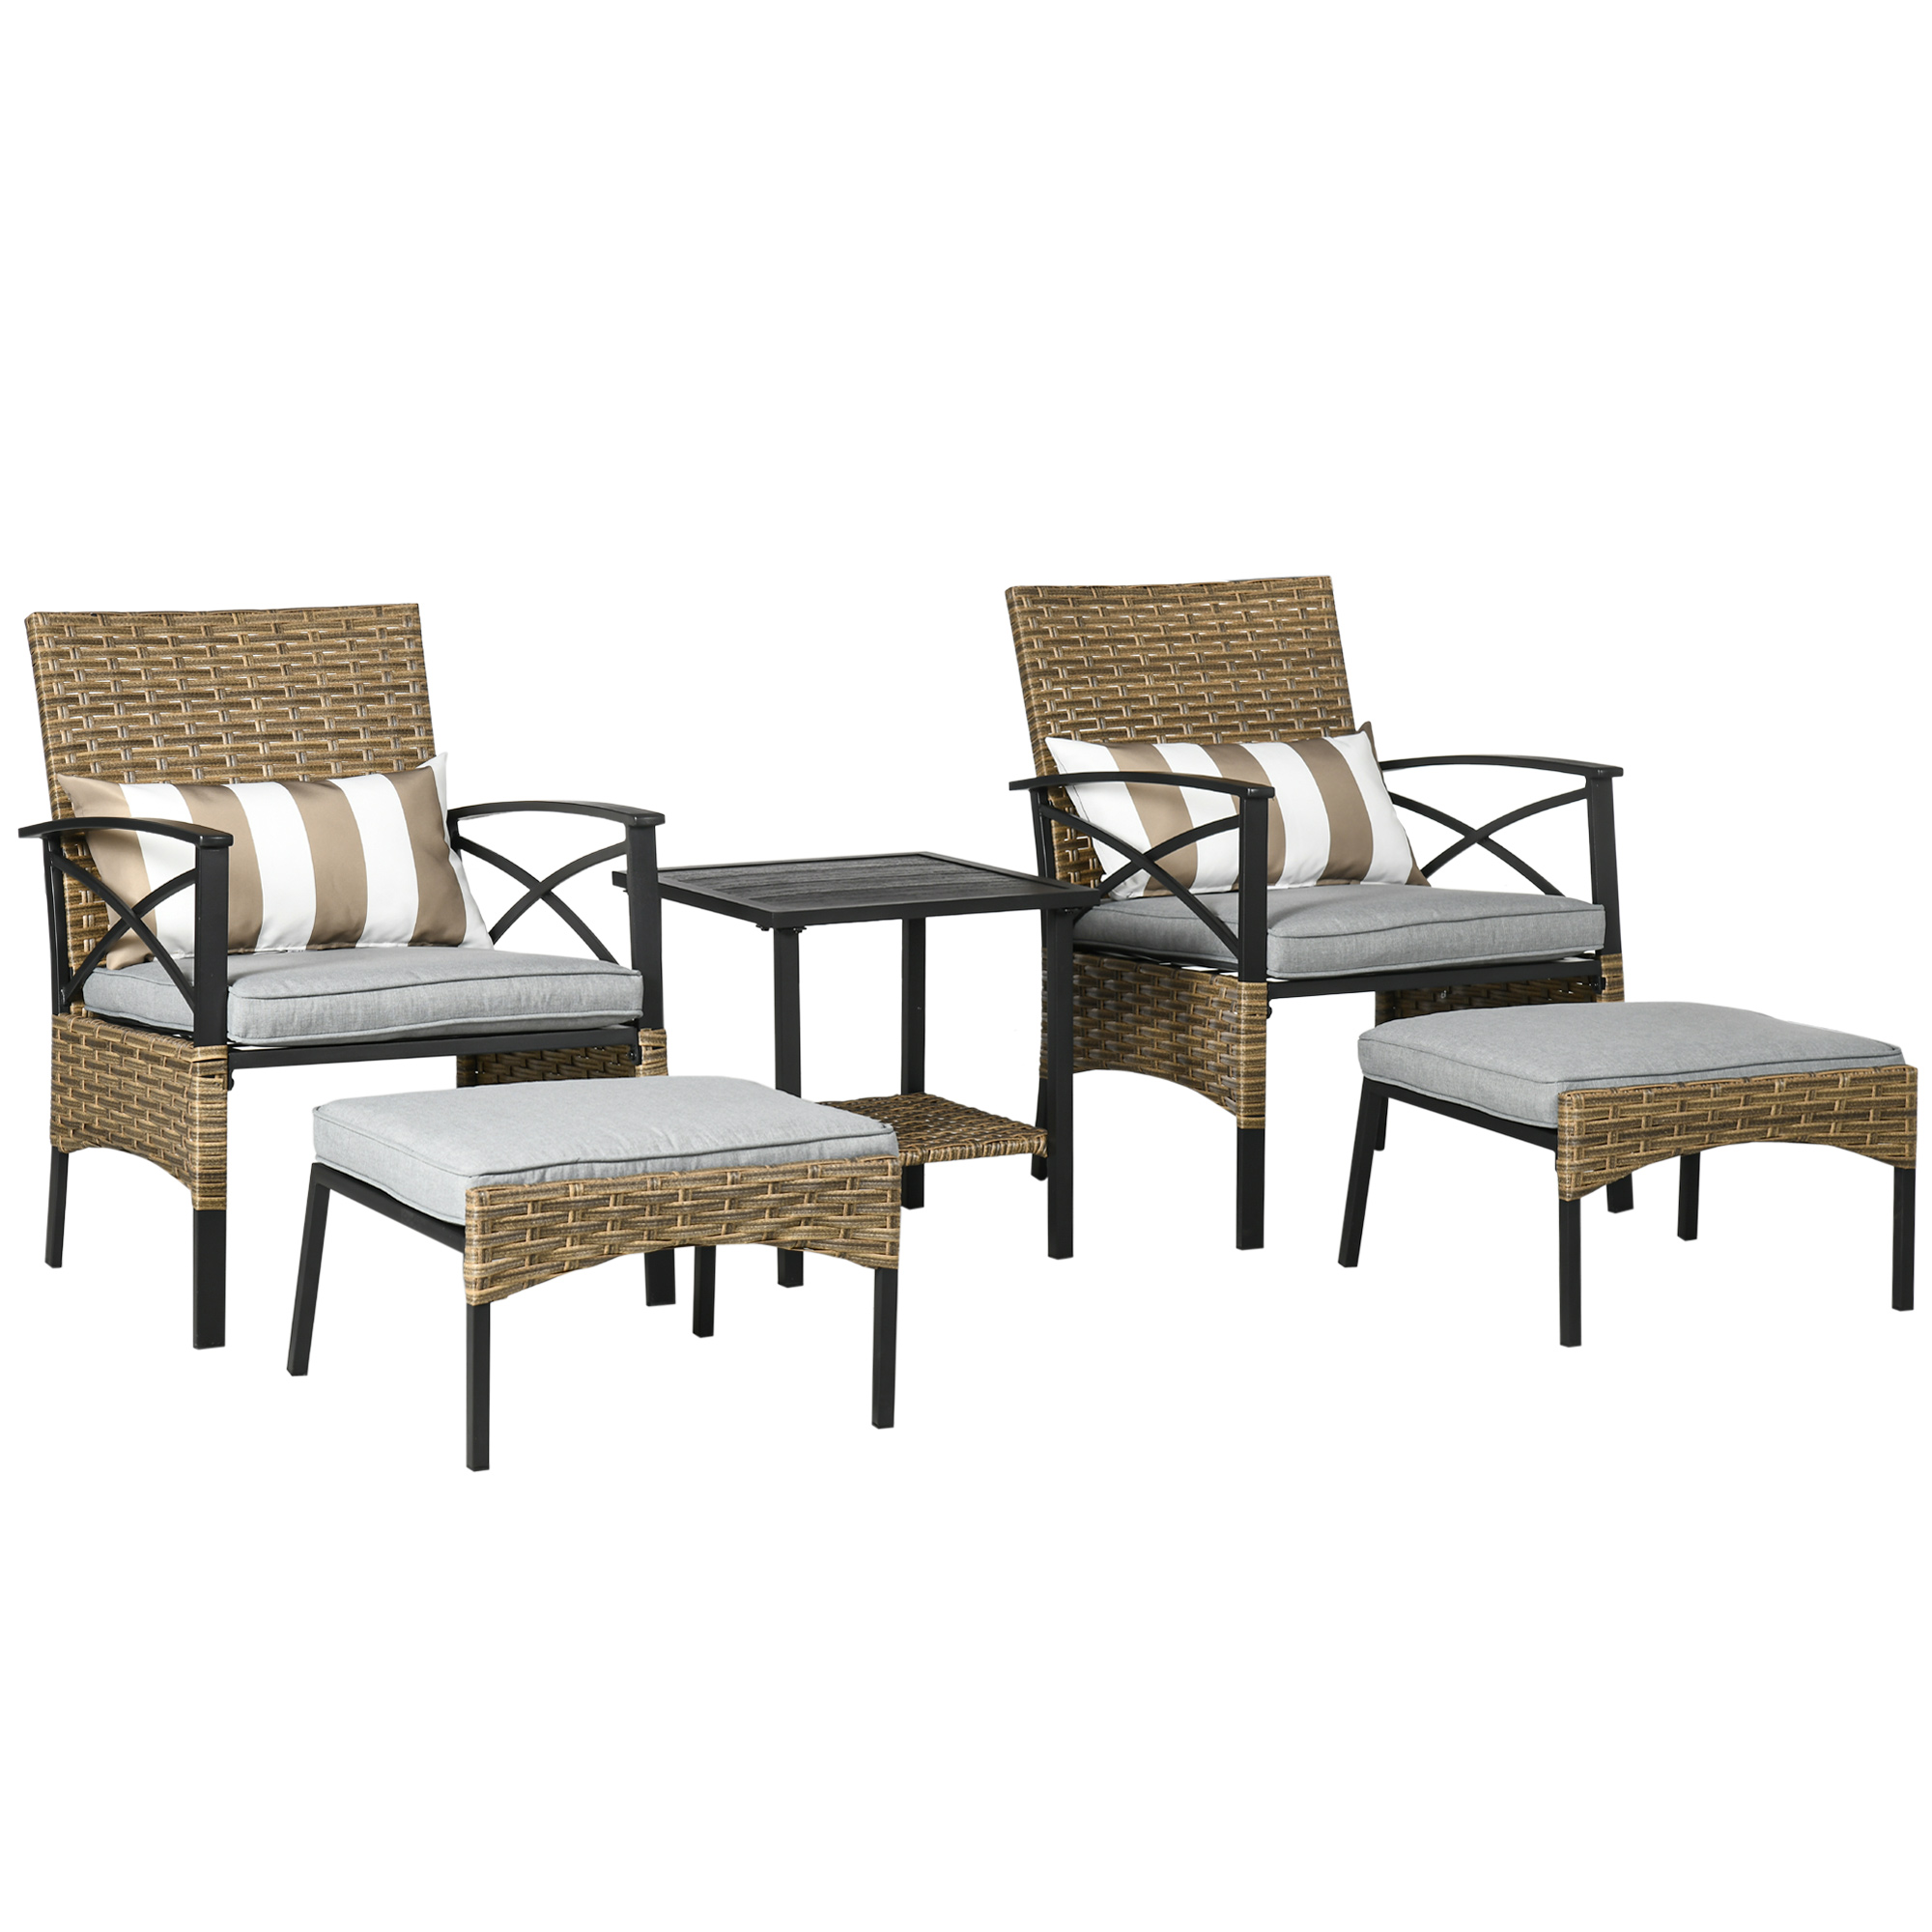 5pc Rattan Garden Furniture Set w/Chair, Footstool and Table